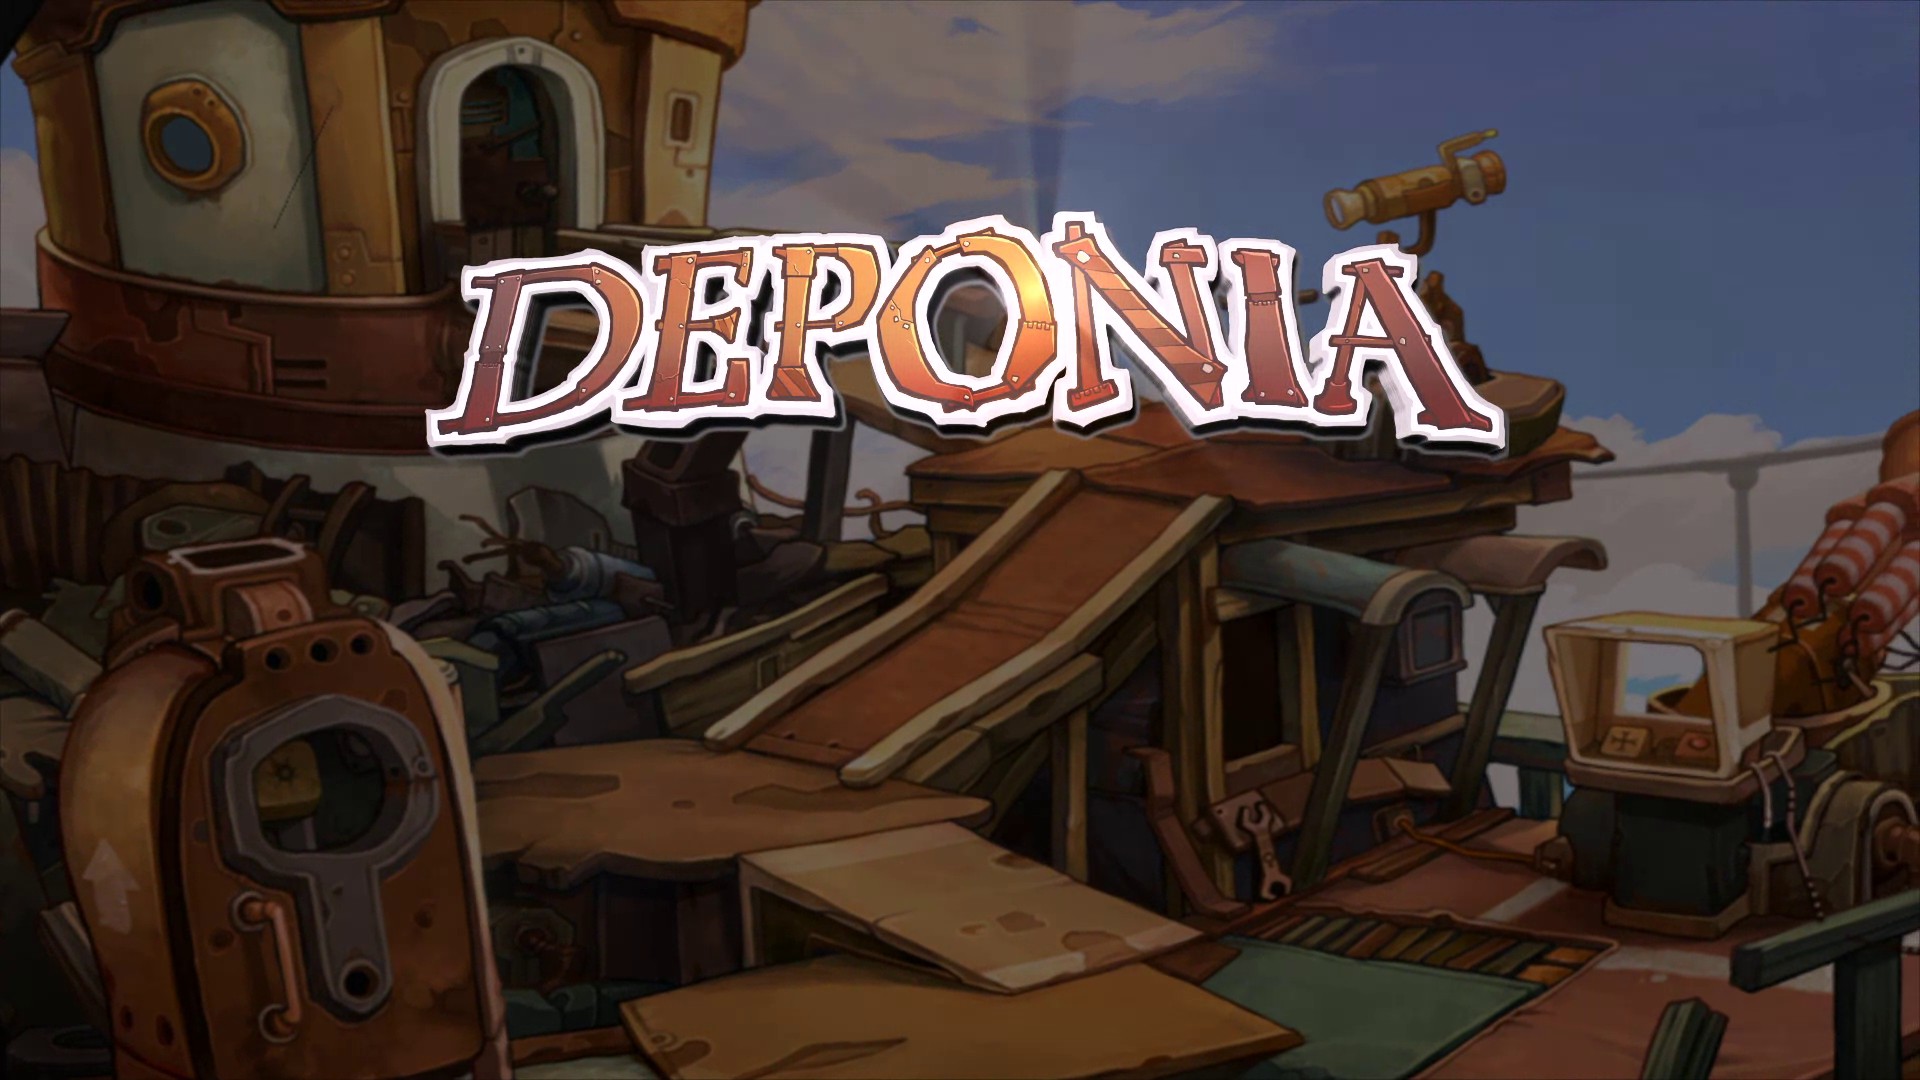 Home/featured/welcome To Deponia Review - Deponia Title , HD Wallpaper & Backgrounds